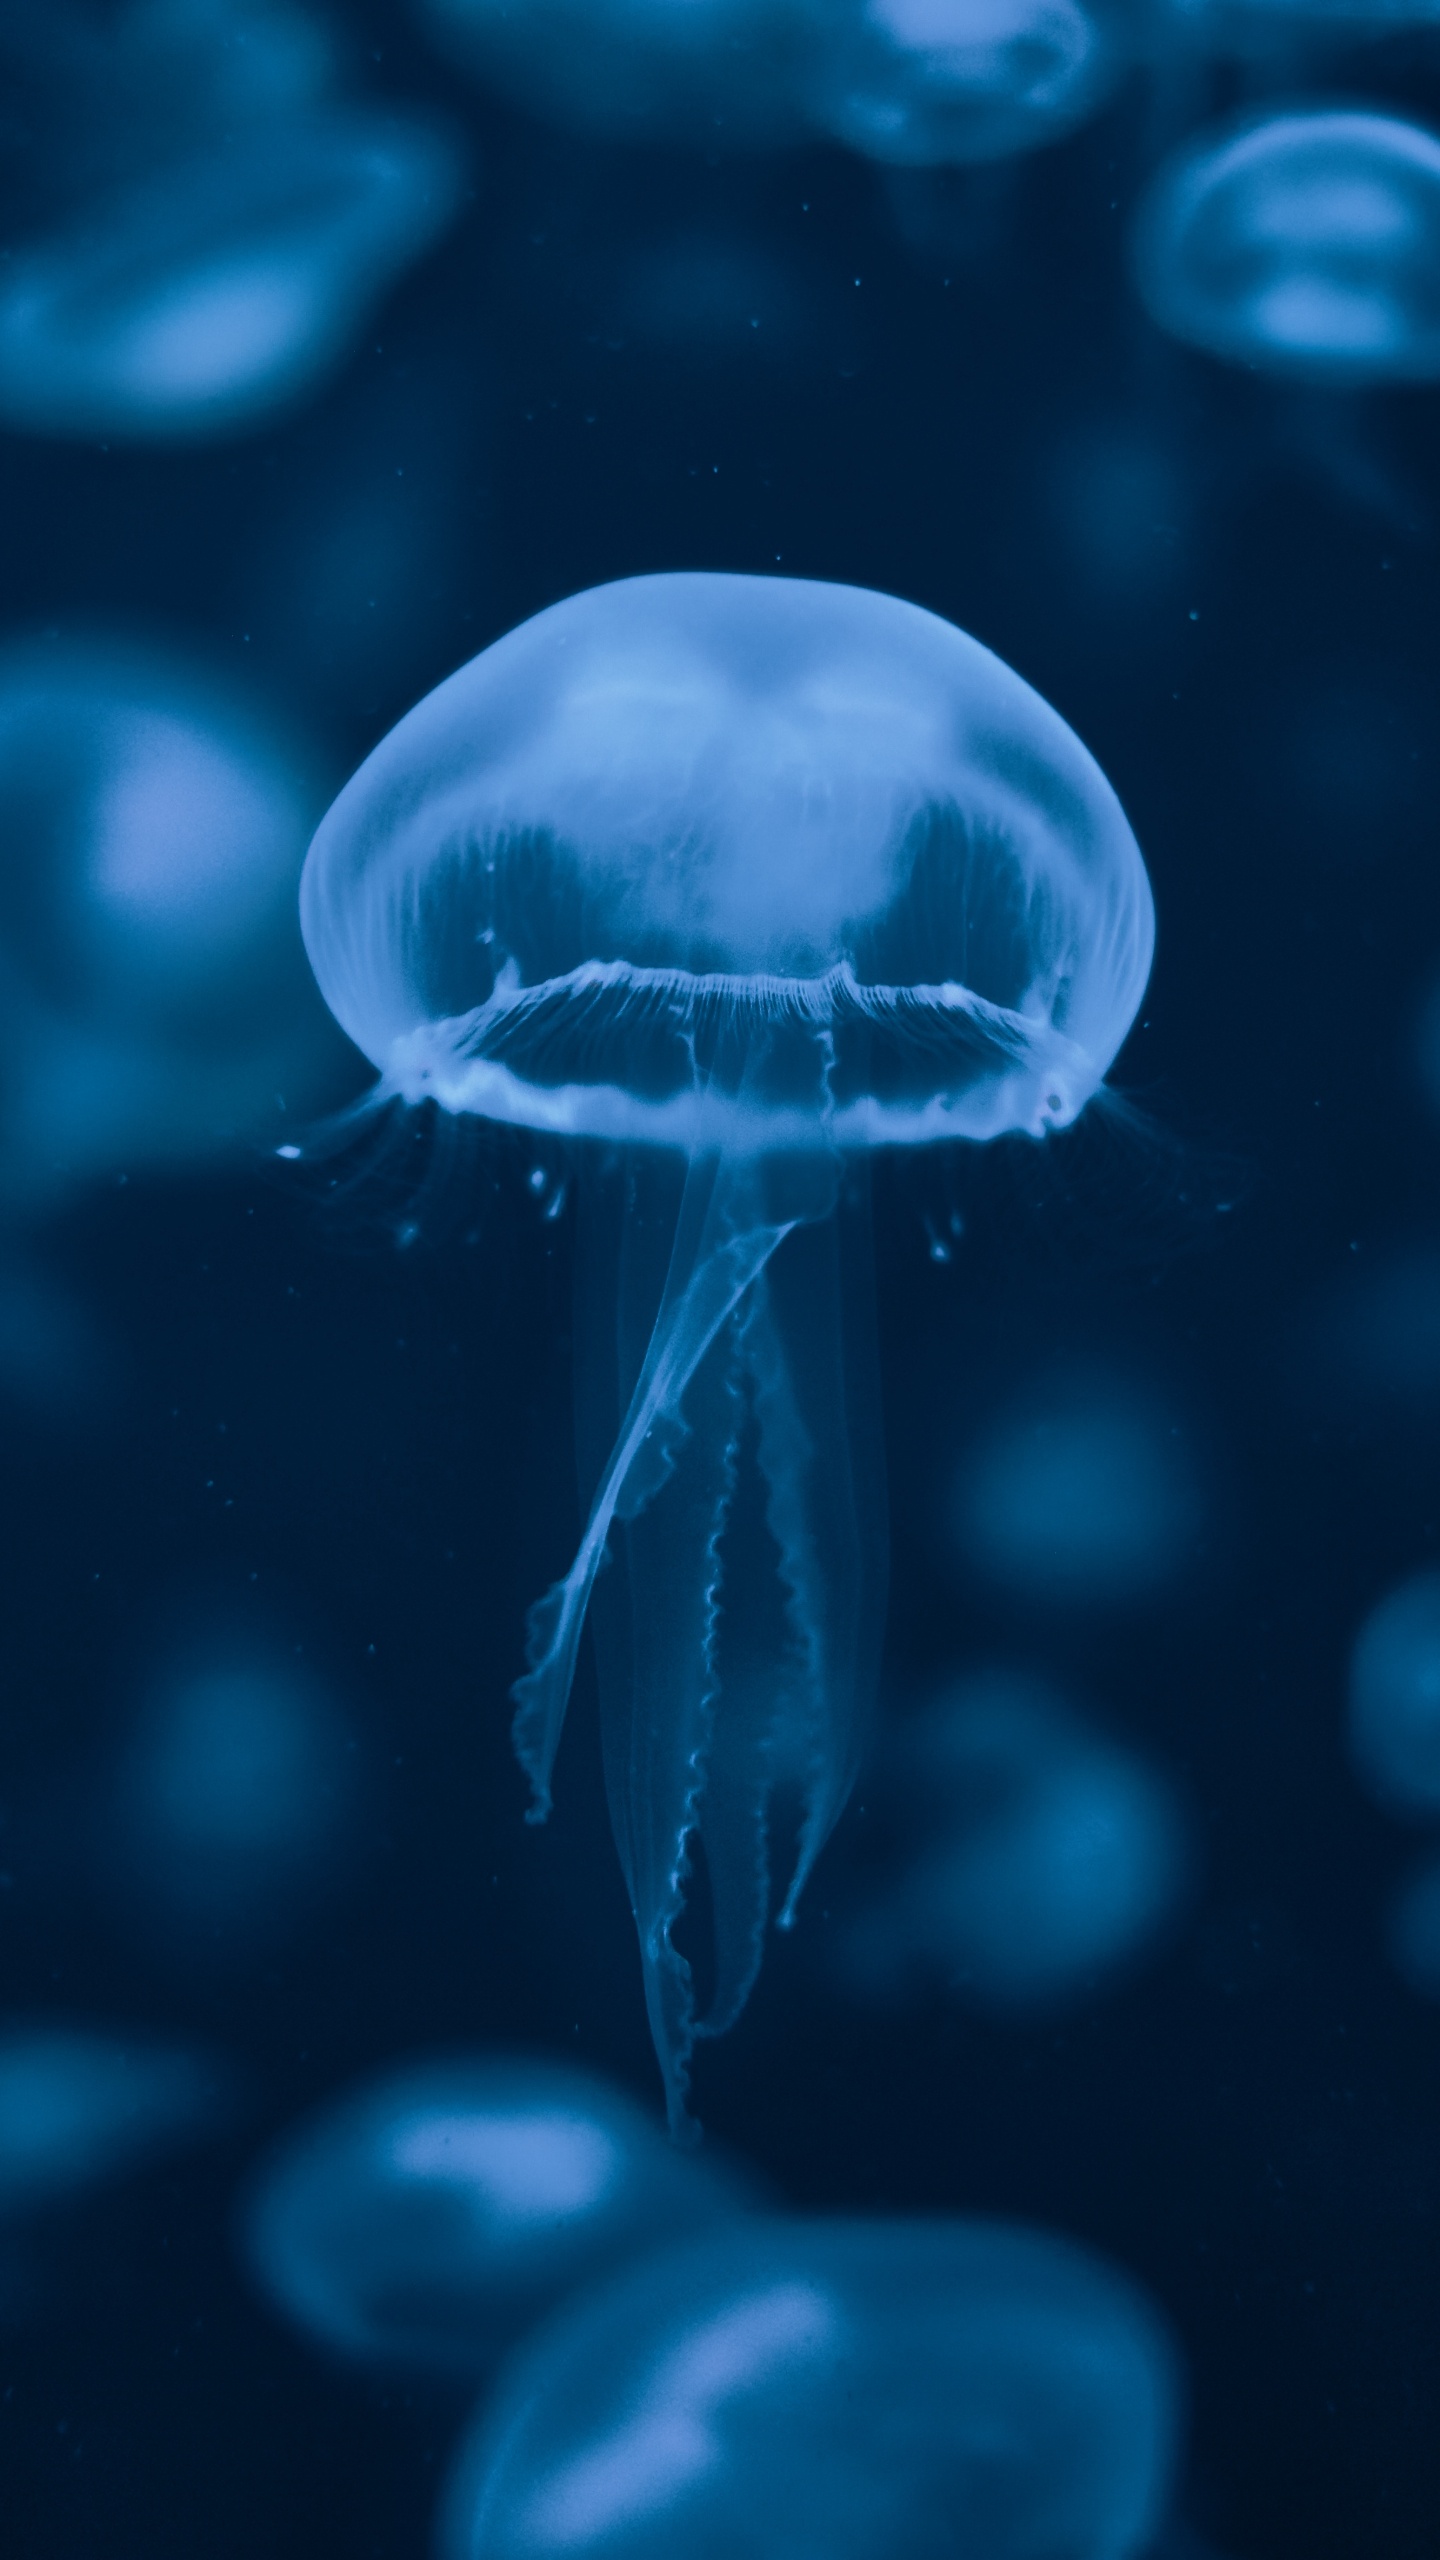 Blue and White Jellyfish Illustration. Wallpaper in 1440x2560 Resolution